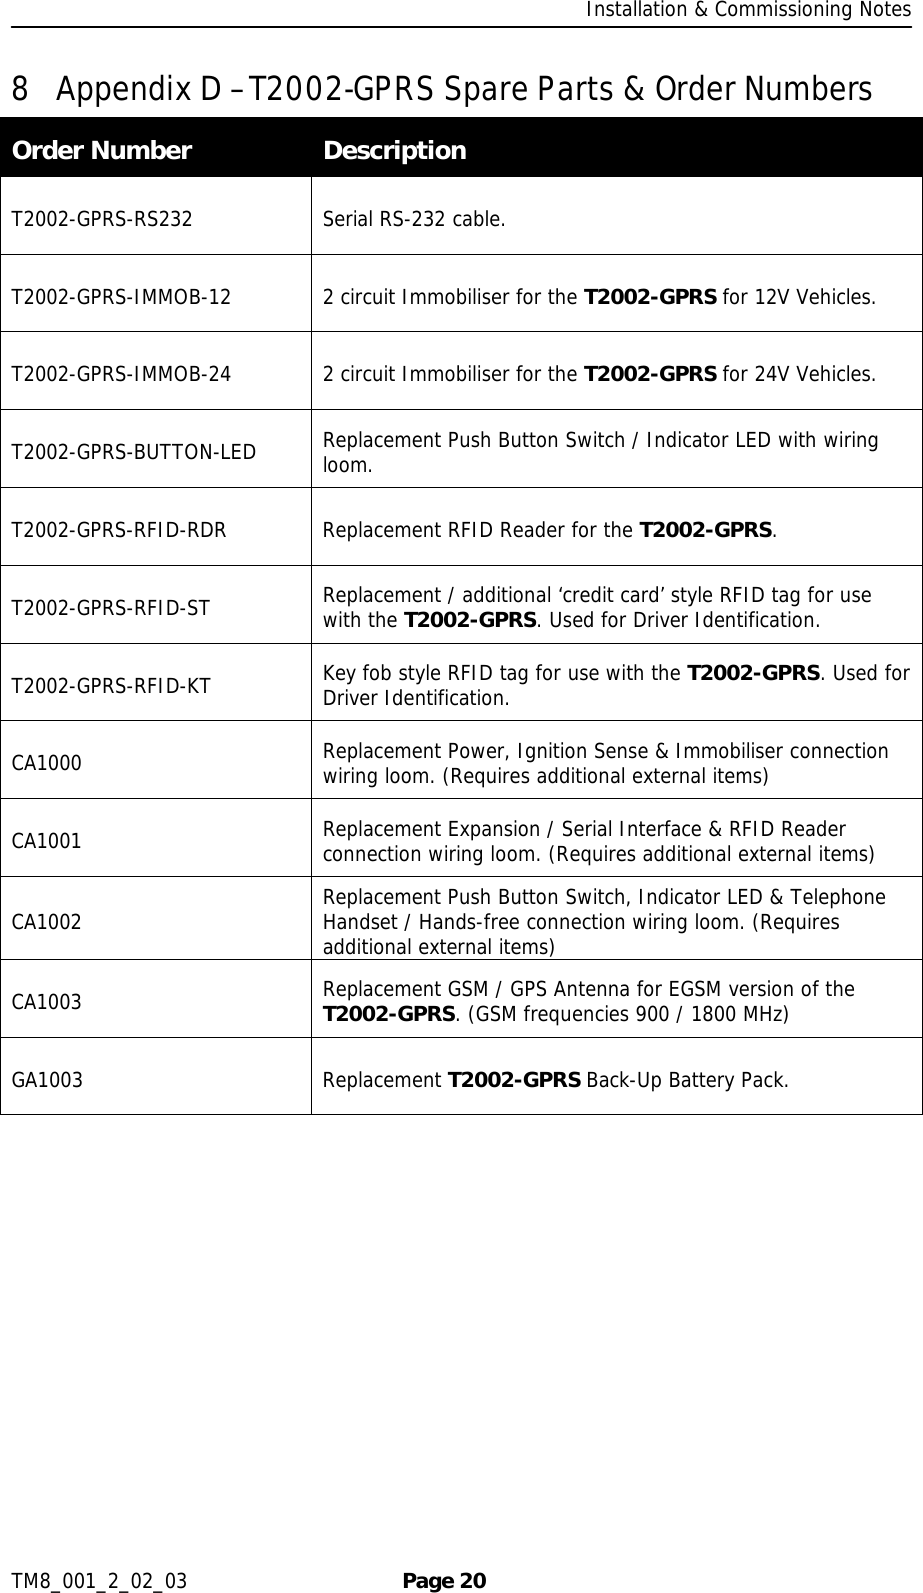     Installation &amp; Commissioning Notes TM8_001_2_02_03  Page 20 8 Appendix D –T2002-GPRS    Spare Parts &amp; Order Numbers Order Number  Description T2002-GPRS-RS232 Serial RS-232 cable. T2002-GPRS-IMMOB-12  2 circuit Immobiliser for the T2002-GPRS for 12V Vehicles. T2002-GPRS-IMMOB-24  2 circuit Immobiliser for the T2002-GPRS for 24V Vehicles. T2002-GPRS-BUTTON-LED  Replacement Push Button Switch / Indicator LED with wiring loom. T2002-GPRS-RFID-RDR  Replacement RFID Reader for the T2002-GPRS. T2002-GPRS-RFID-ST  Replacement / additional ‘credit card’ style RFID tag for use with the T2002-GPRS. Used for Driver Identification. T2002-GPRS-RFID-KT  Key fob style RFID tag for use with the T2002-GPRS. Used for Driver Identification. CA1000  Replacement Power, Ignition Sense &amp; Immobiliser connection wiring loom. (Requires additional external items) CA1001  Replacement Expansion / Serial Interface &amp; RFID Reader connection wiring loom. (Requires additional external items) CA1002  Replacement Push Button Switch, Indicator LED &amp; Telephone Handset / Hands-free connection wiring loom. (Requires additional external items) CA1003  Replacement GSM / GPS Antenna for EGSM version of the T2002-GPRS. (GSM frequencies 900 / 1800 MHz) GA1003 Replacement T2002-GPRS Back-Up Battery Pack. 